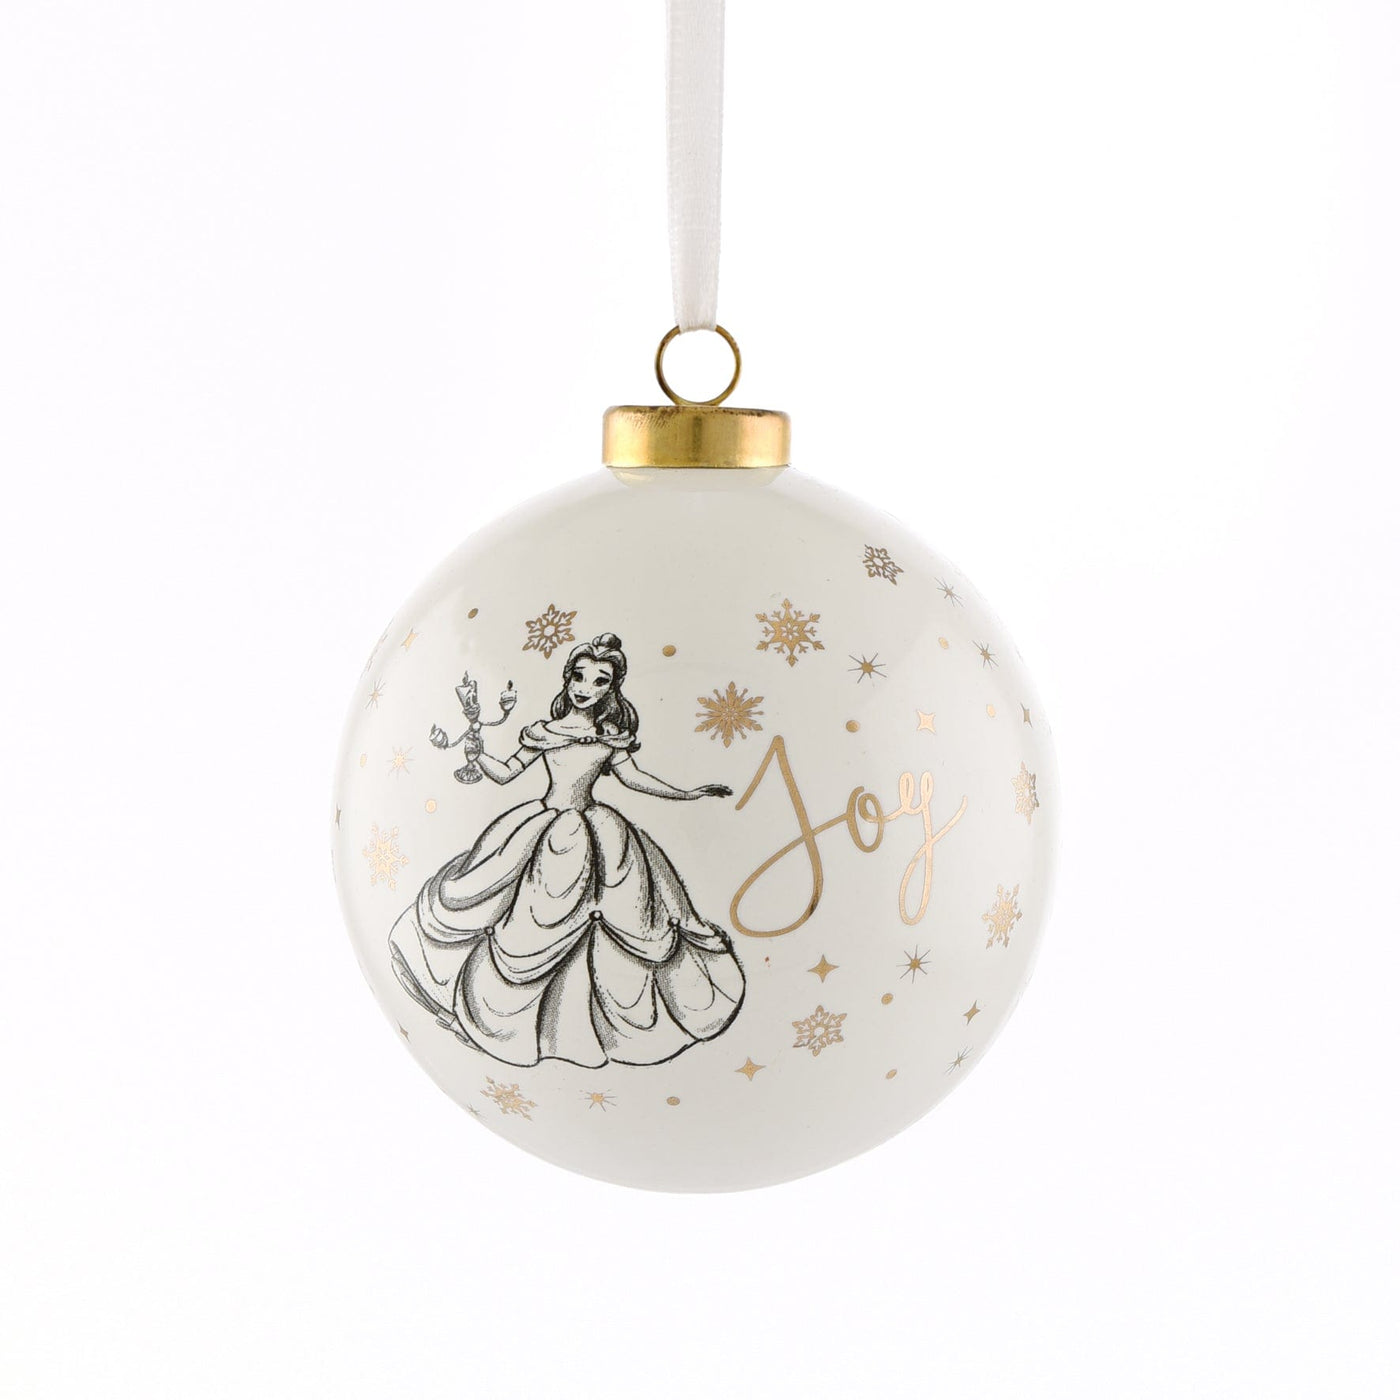 Widdop Gifts Christmas Decorations Disney Beauty and the Beast Princess Belle Christmas Bauble